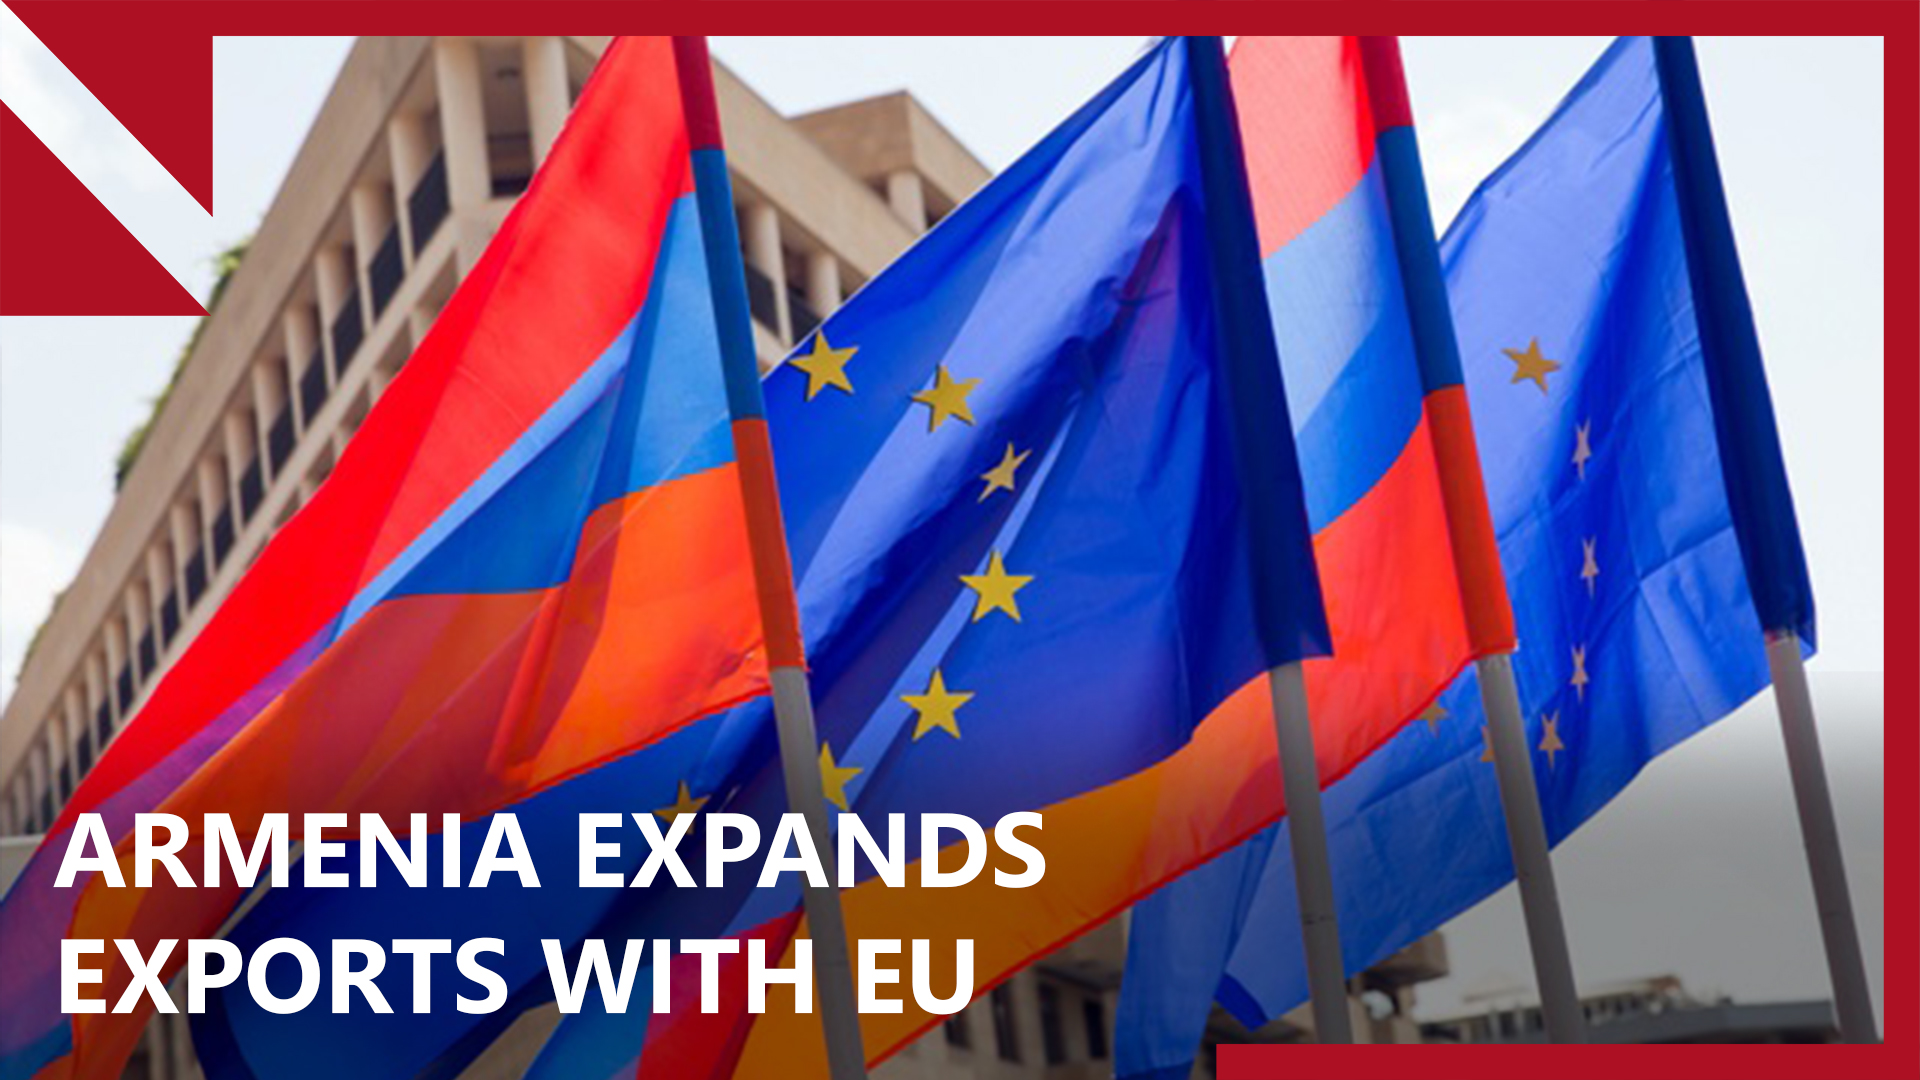 As Armenia-EU trade blooms, Armenian exporters look to new opportunities